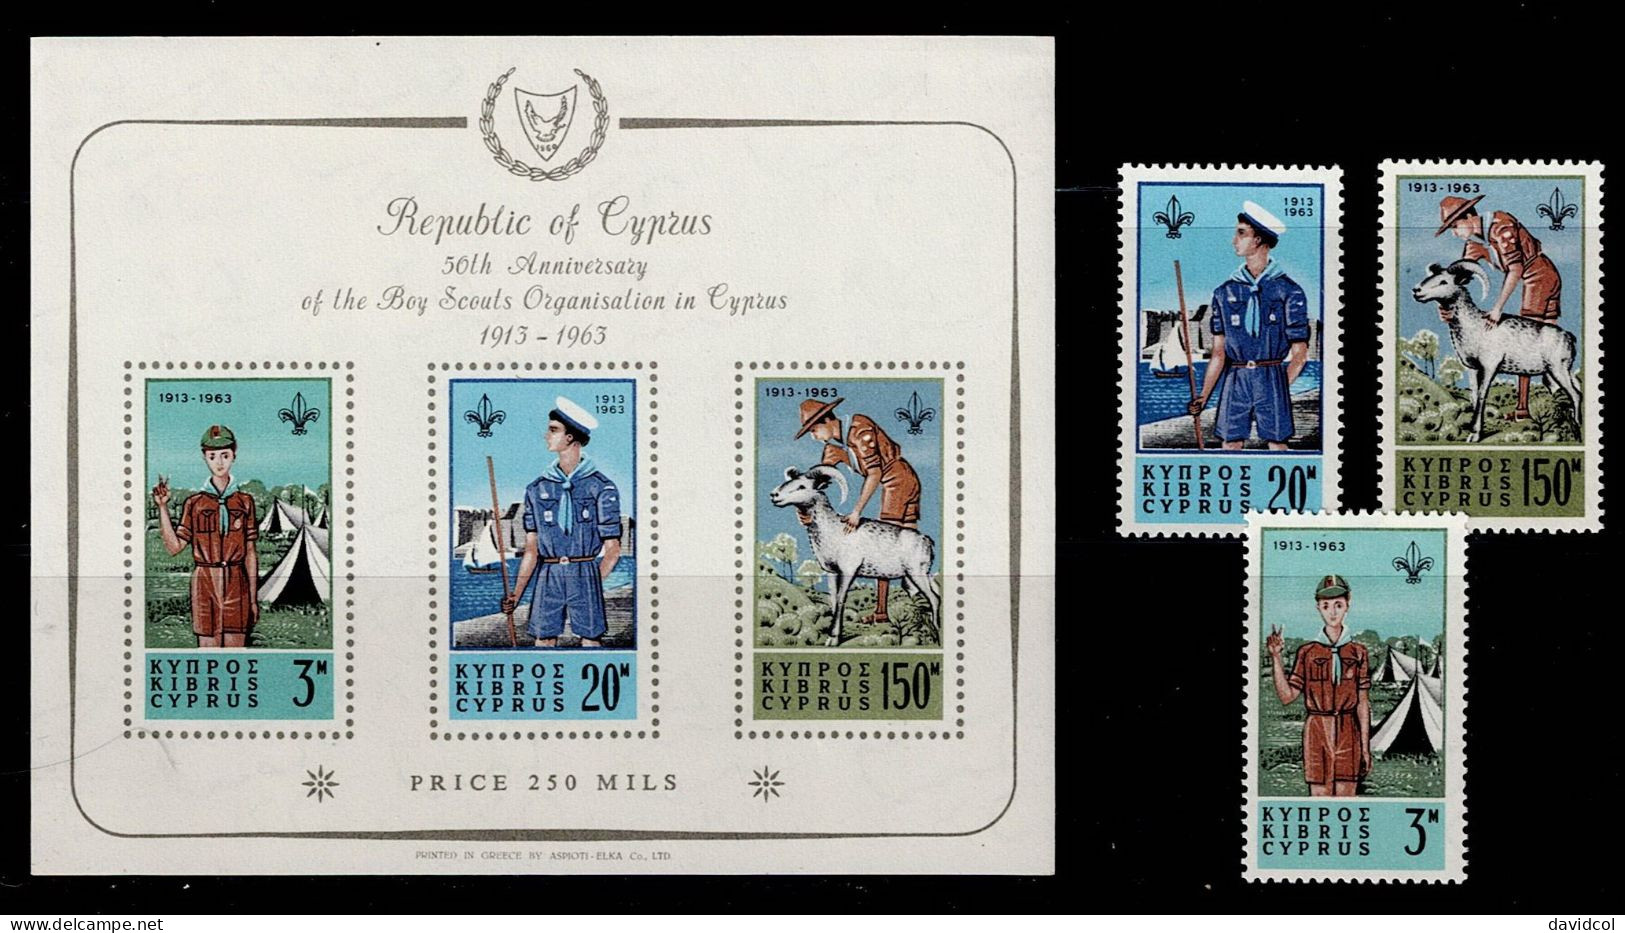 CHP-02- CYPRUS - 1963 - MNH -SCOUTS- 50TH ANNIVERSARY BOY SCOUTS OF CYPRUS - Neufs